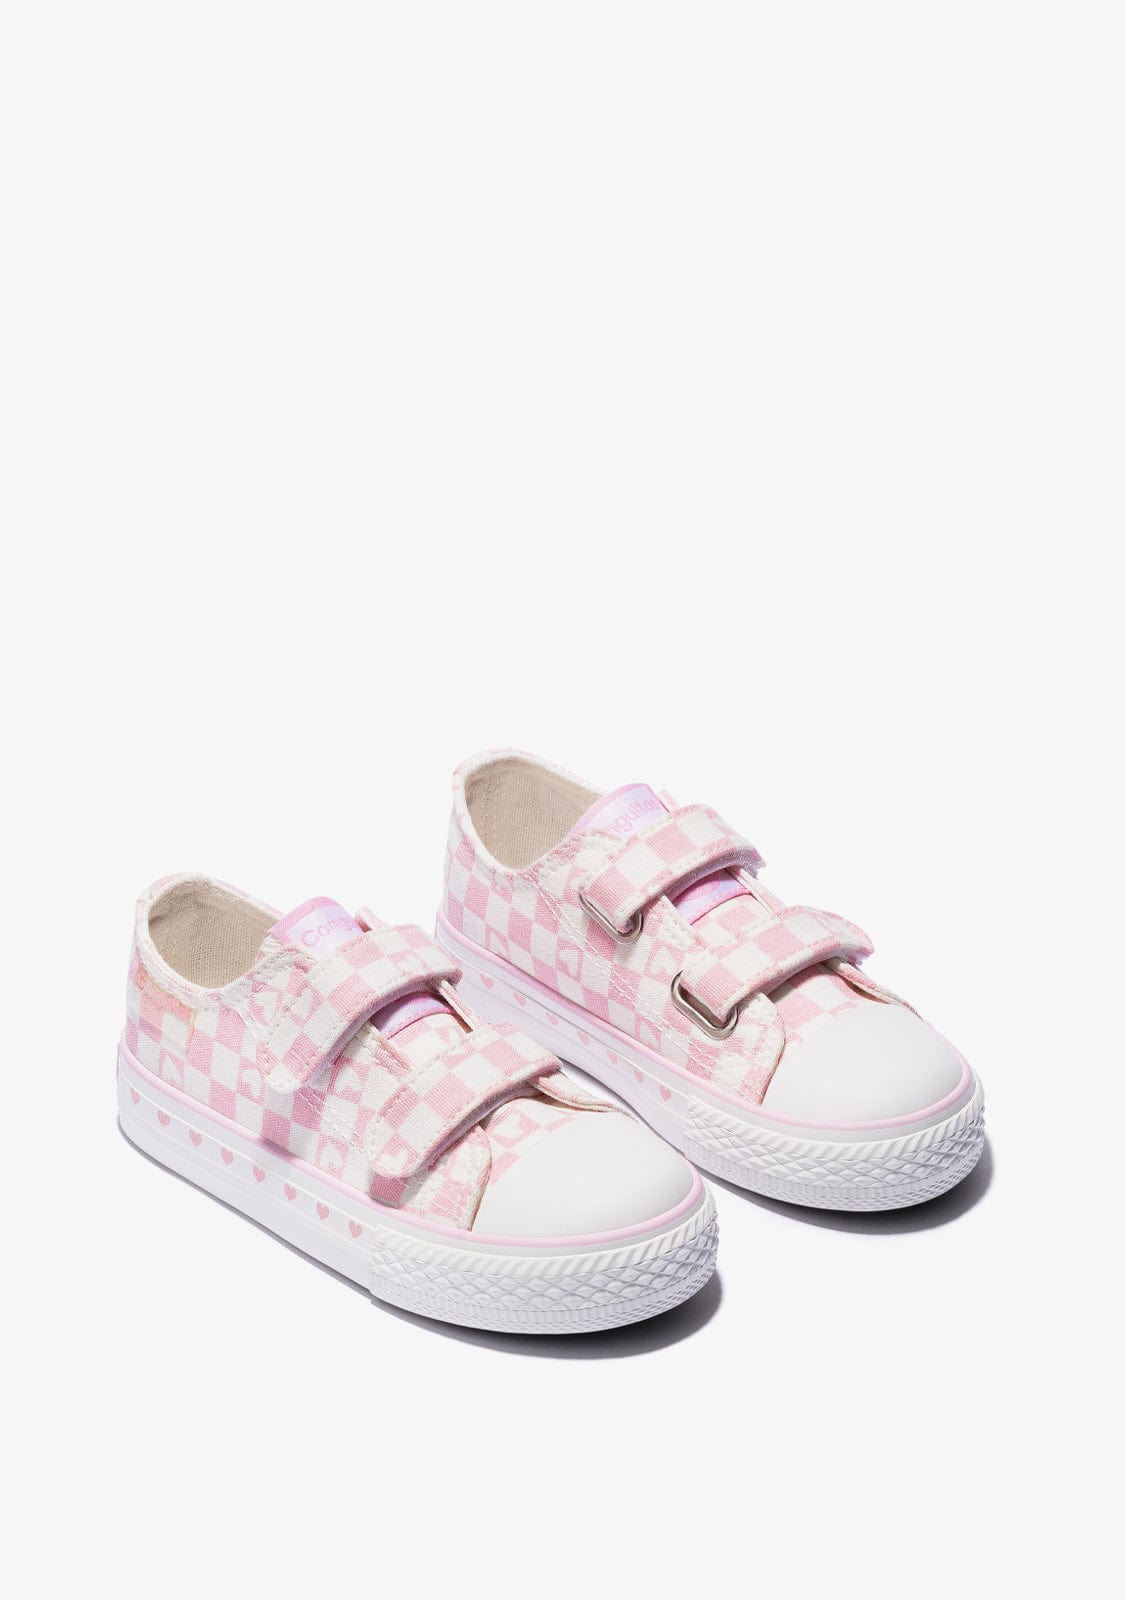 CONGUITOS Shoes Girl's Pink Squares Sneakers Canvas